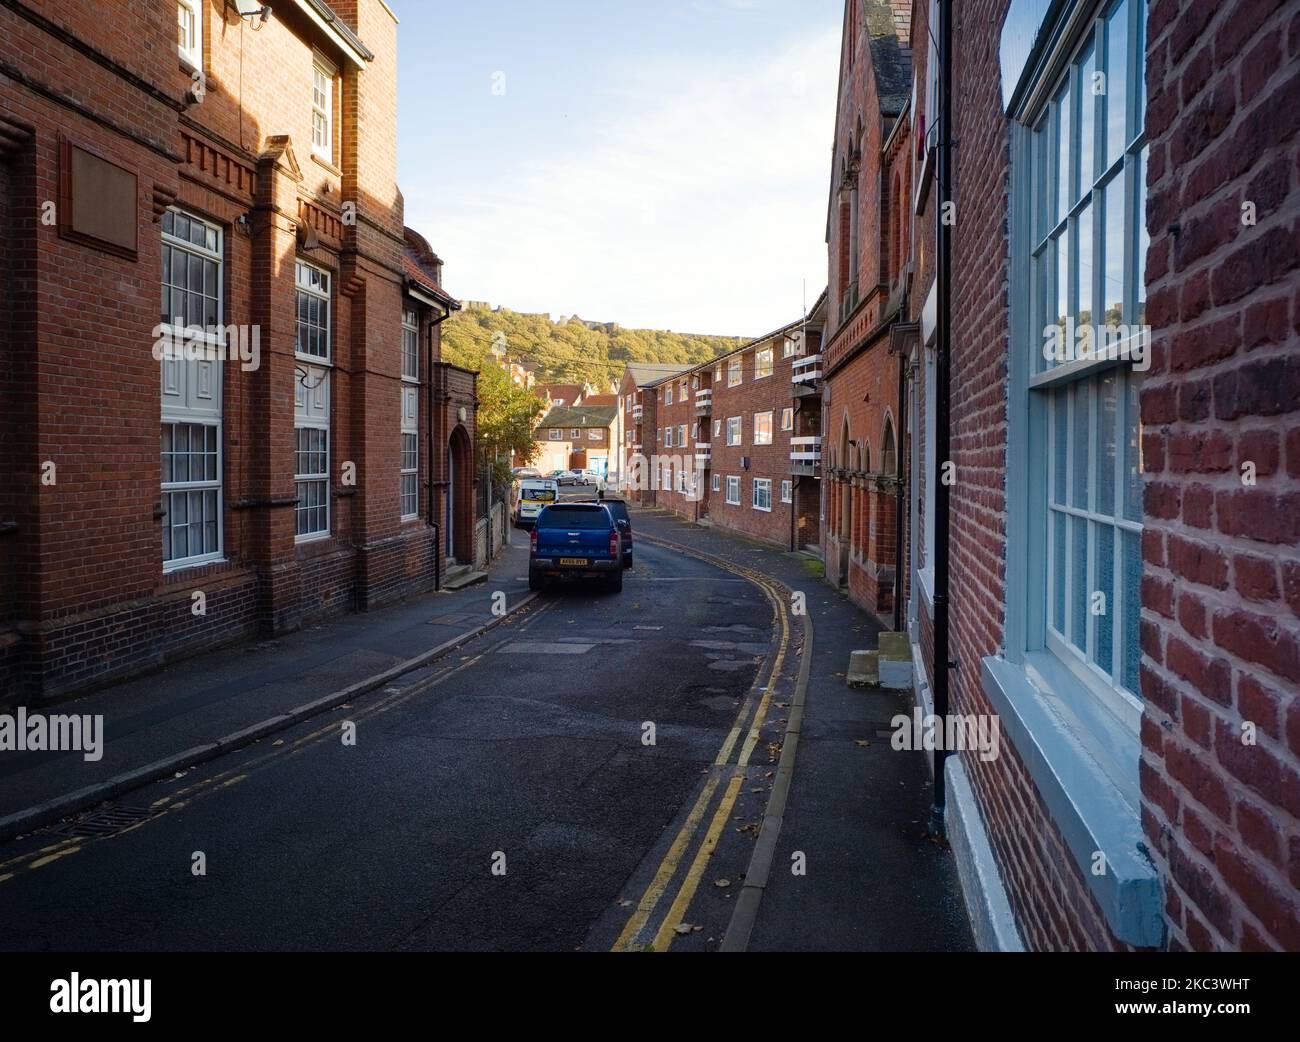 St Sepulchre Street in the old town part of Scarborough looking towards the castle Stock Photo